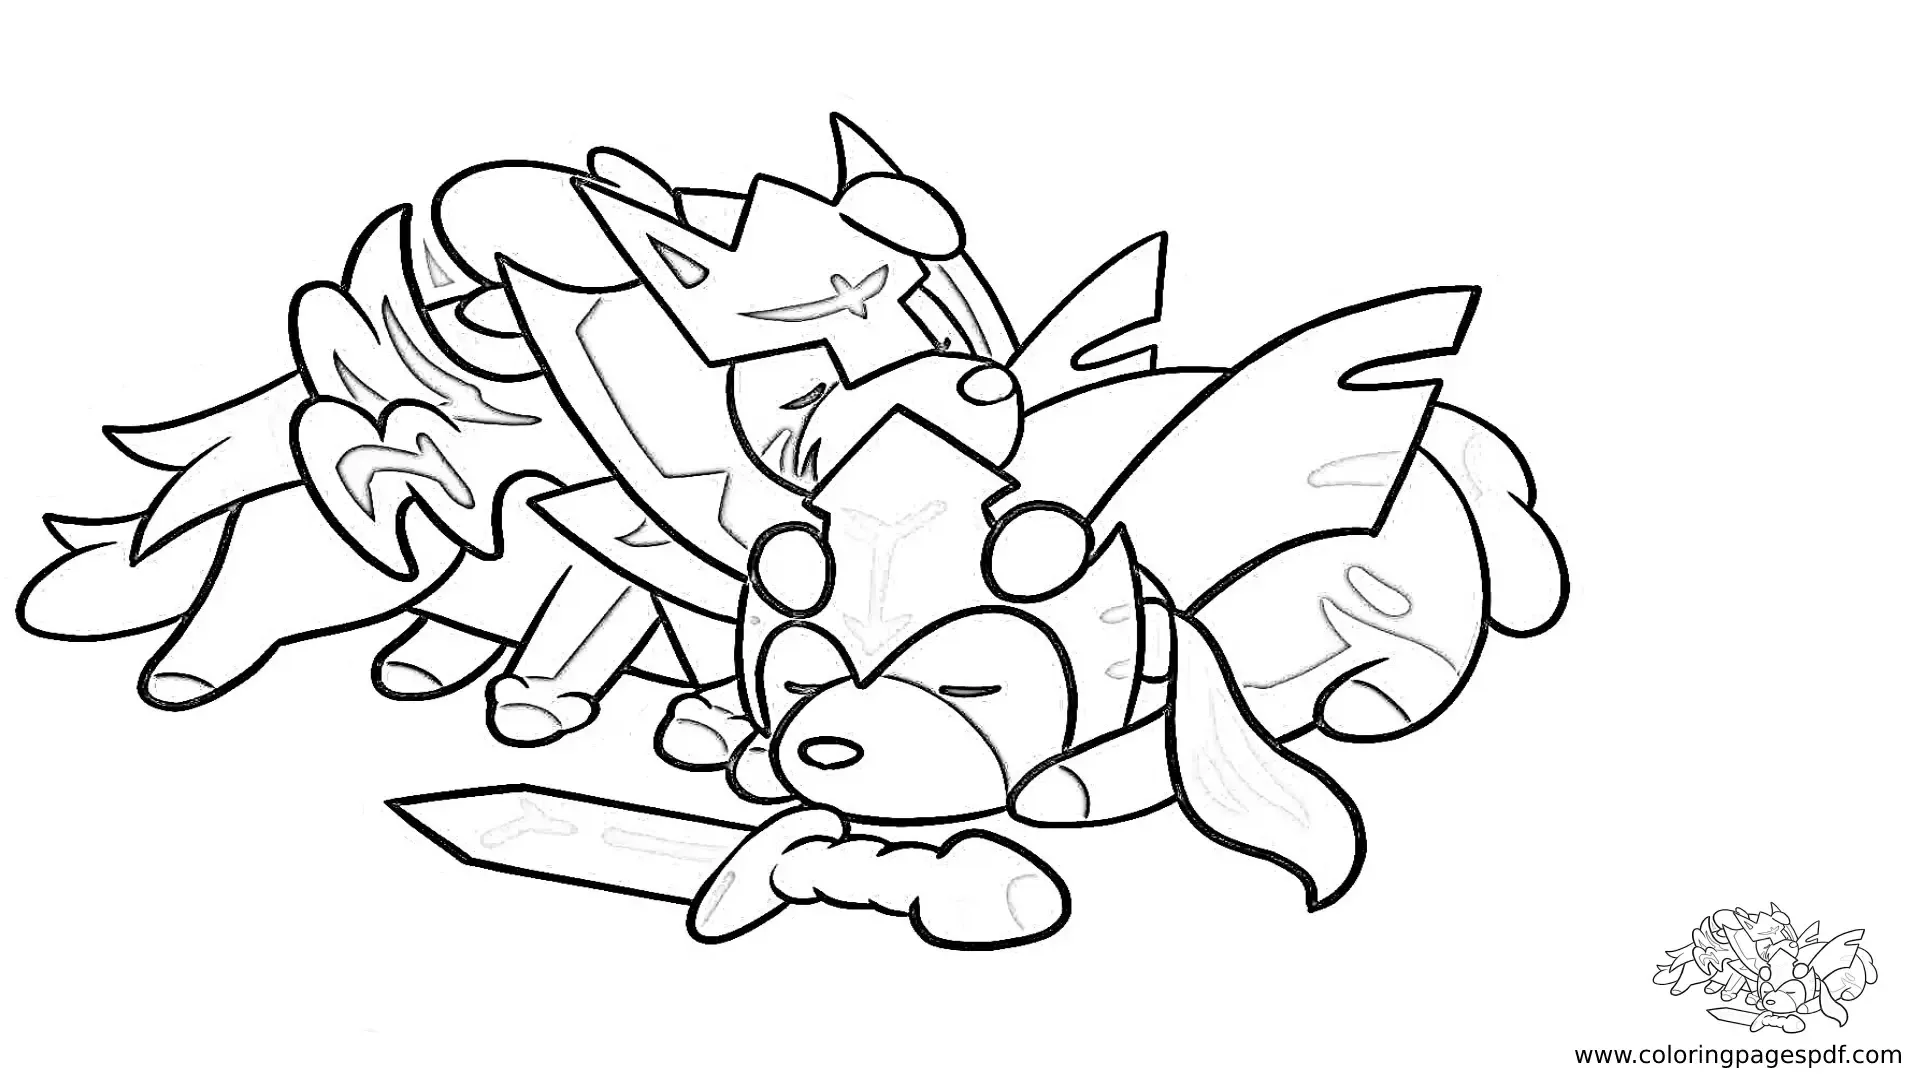 Coloring Page Of Zacian Both Forms Sleeping